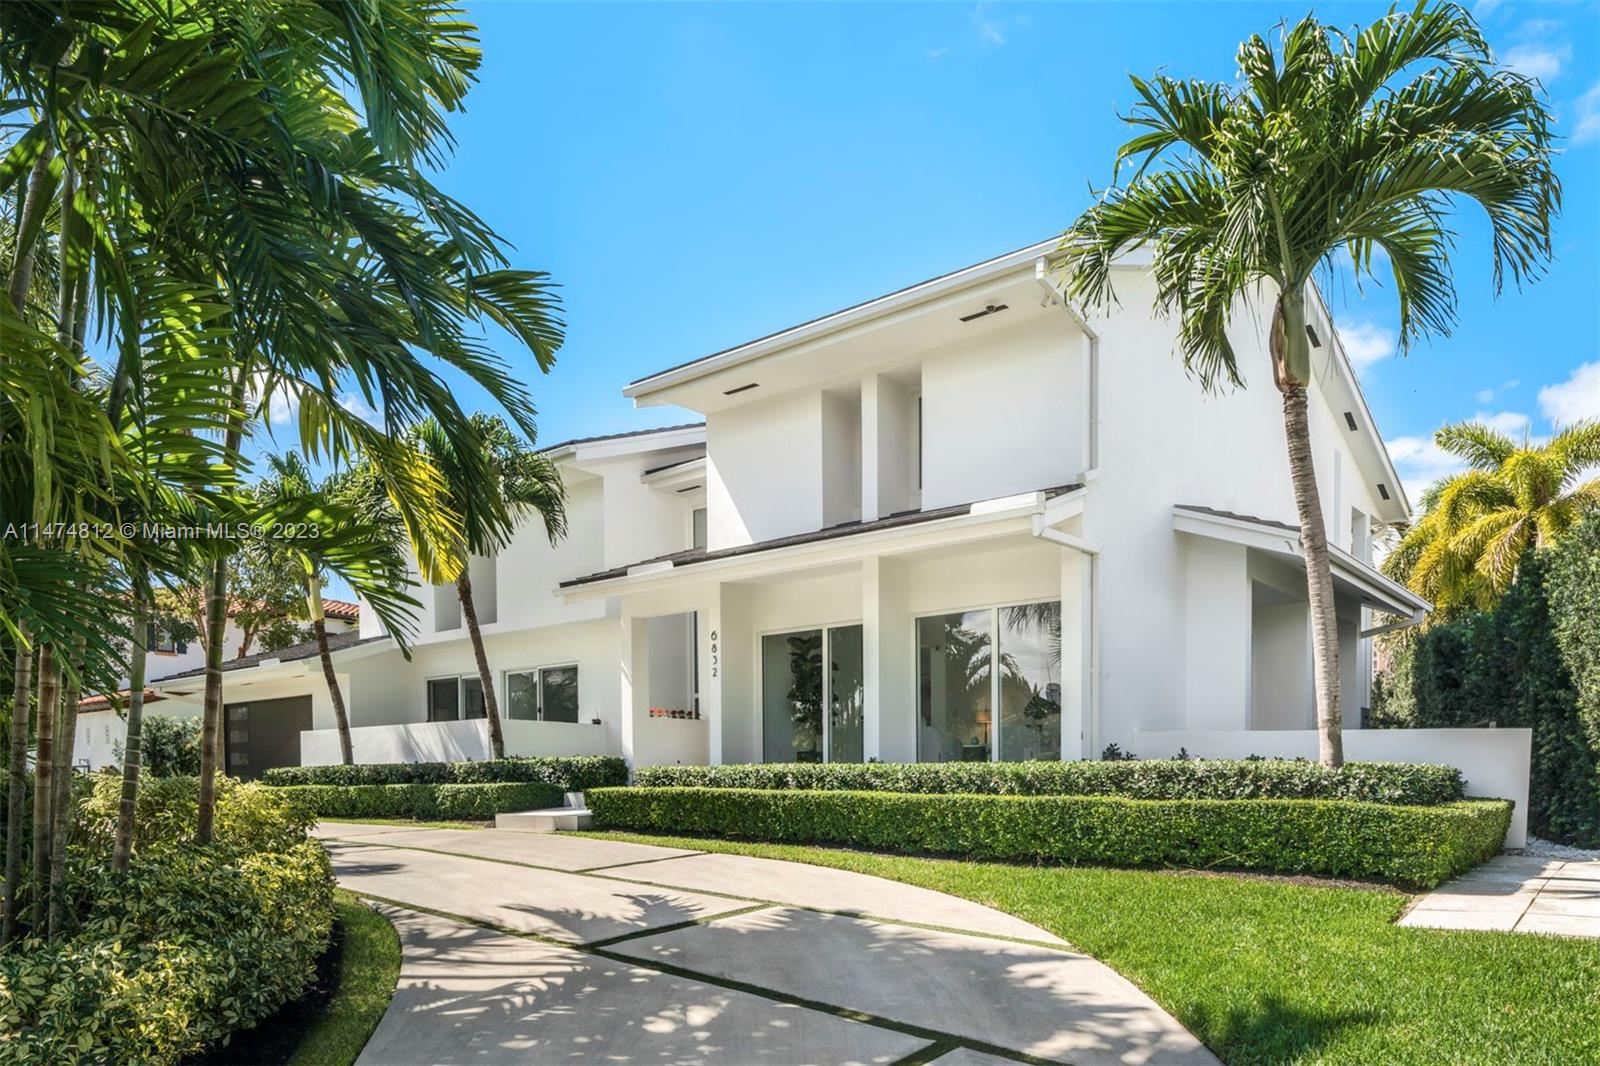 Fully remodeled 6,819 SF waterfront home in the highly sought-after Coral Gables gated community of Sunrise Harbour, with 5 bedrooms and 6 bathrooms. Beautifully oriented pavers &amp; manicured landscaping provide stunning curb appeal leading to a grand entry with volume ceilings. The gourmet kitchen includes an oversized island, custom cabinetry, gas range, and top-of-the-line Thermador and Viking appliances. Tastefully remodeled, the residence offers a bright and spacious floor plan accompanied by high-end designer finishes. It also is a true boater’s paradise, with canal-facing pool, dock, and direct ocean access. Additional features include a climate-controlled wine cellar, new roof, impact windows and doors, smart home system, and electric Lutron blinds. Property is also listed for rent.